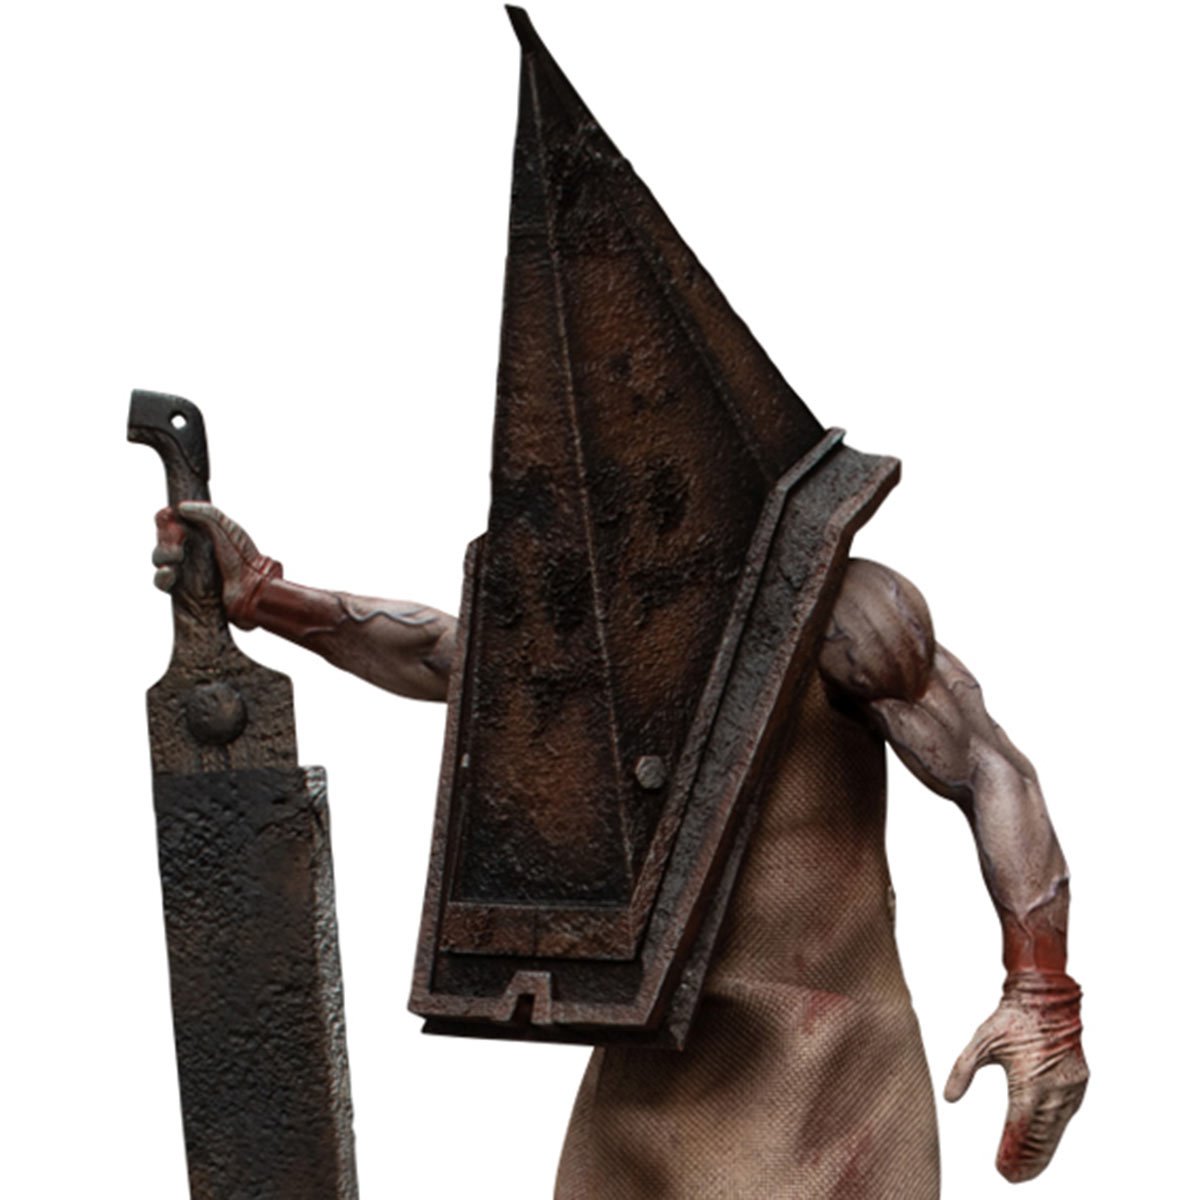 Silent Hill Red Pyramid Head Thing 1:6 Scale Statue